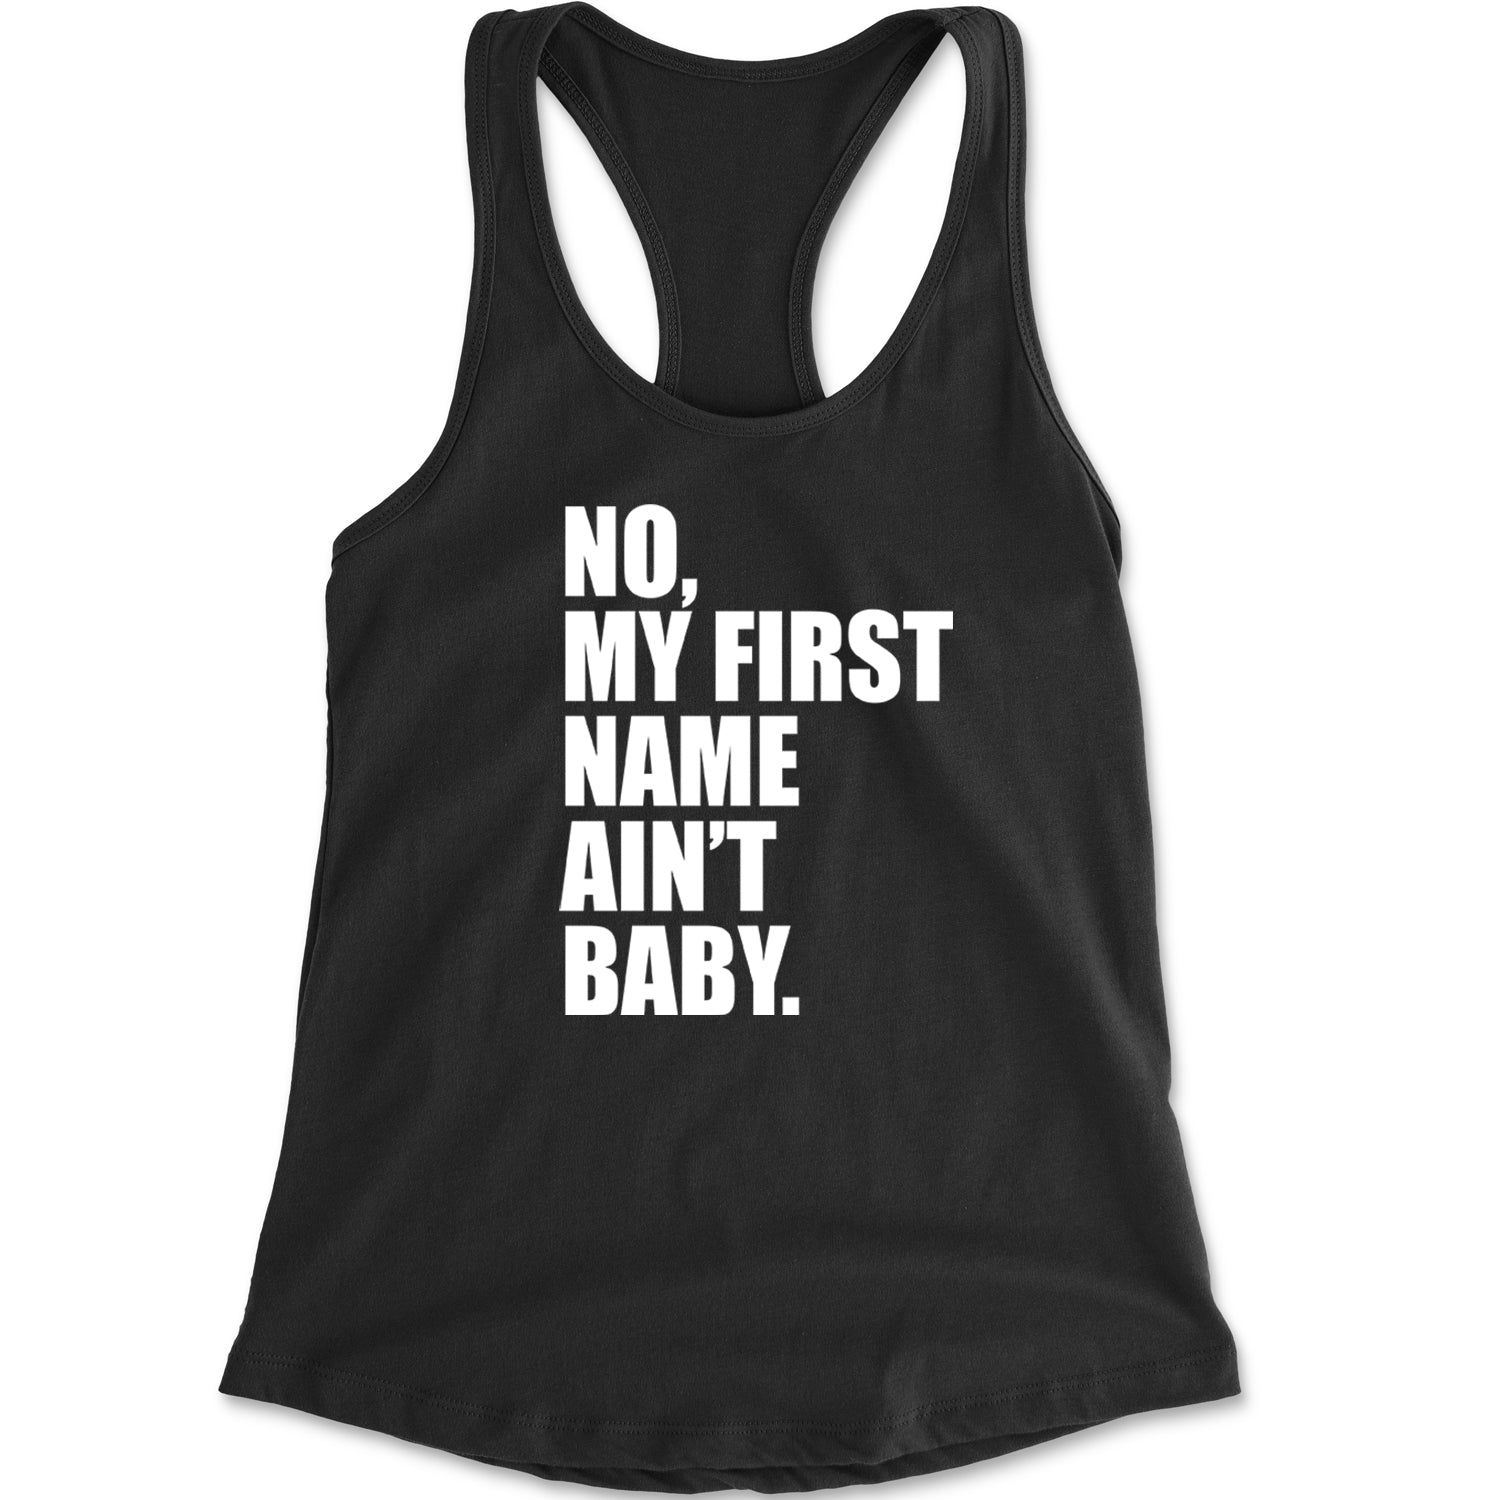 No My First Name Ain't Baby Together Again Racerback Tank Top for Women